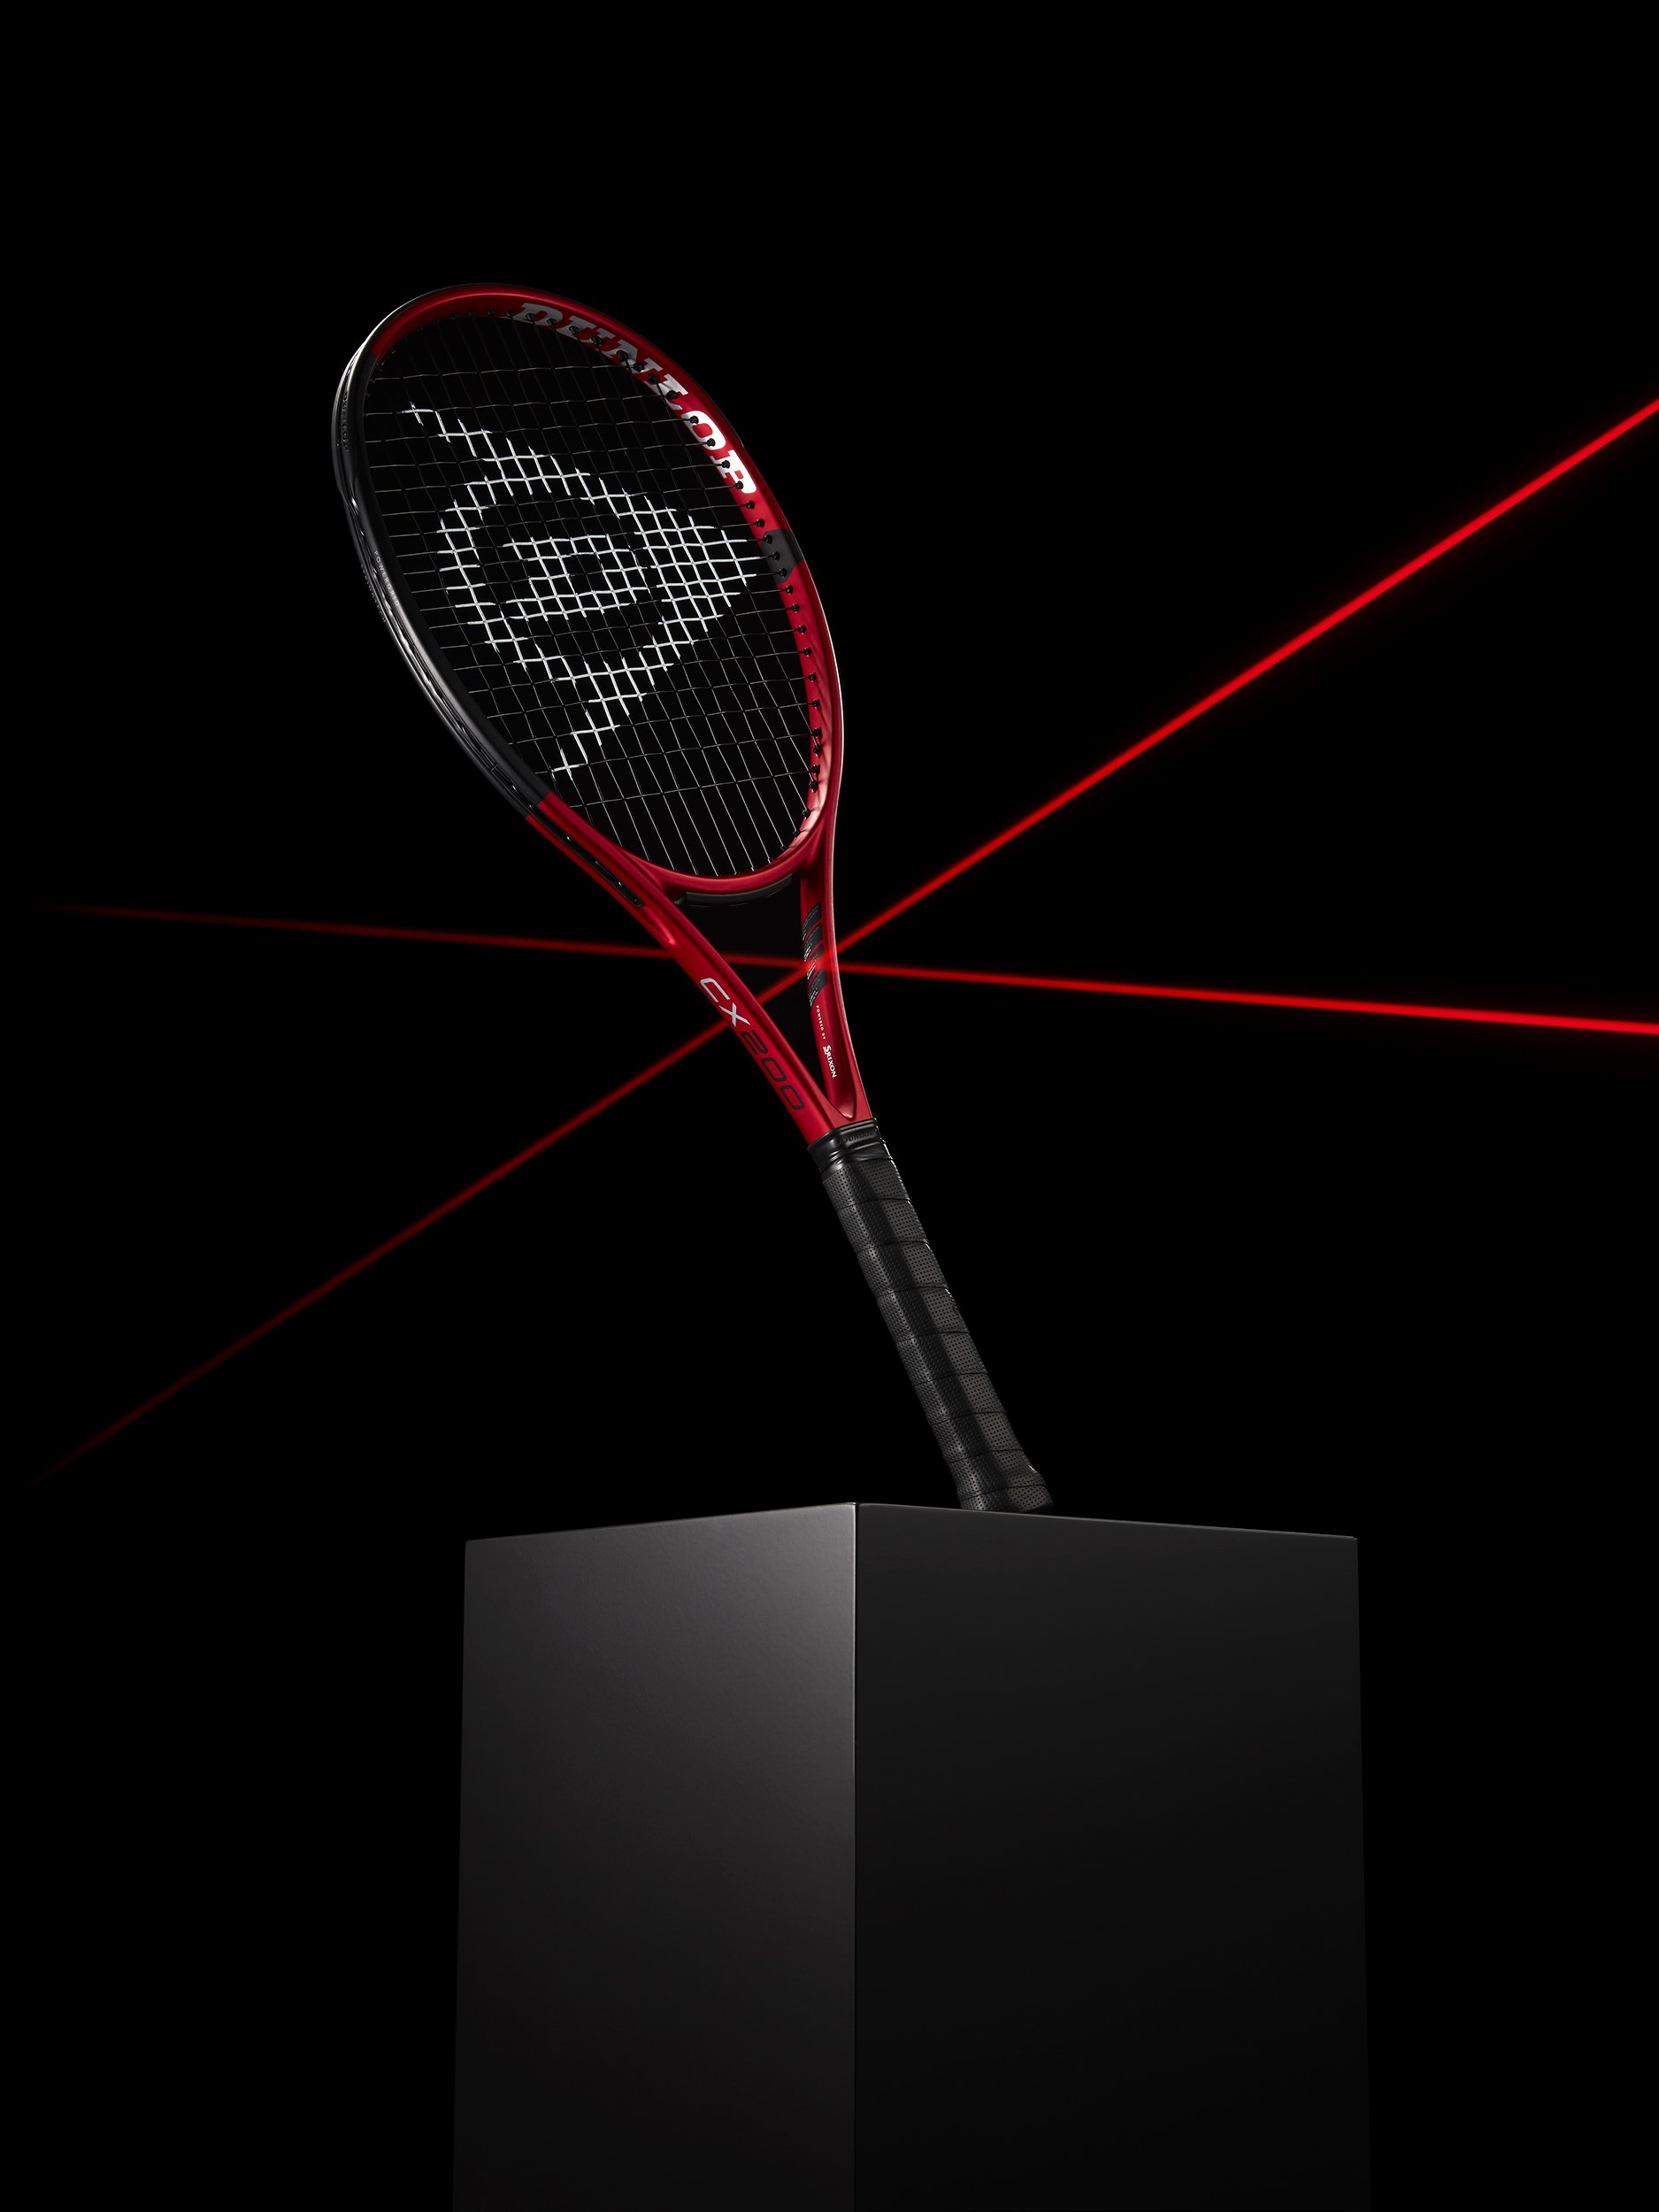 Dunlop Tennis Racket - Advertising Photography by Simon Lyle Photography